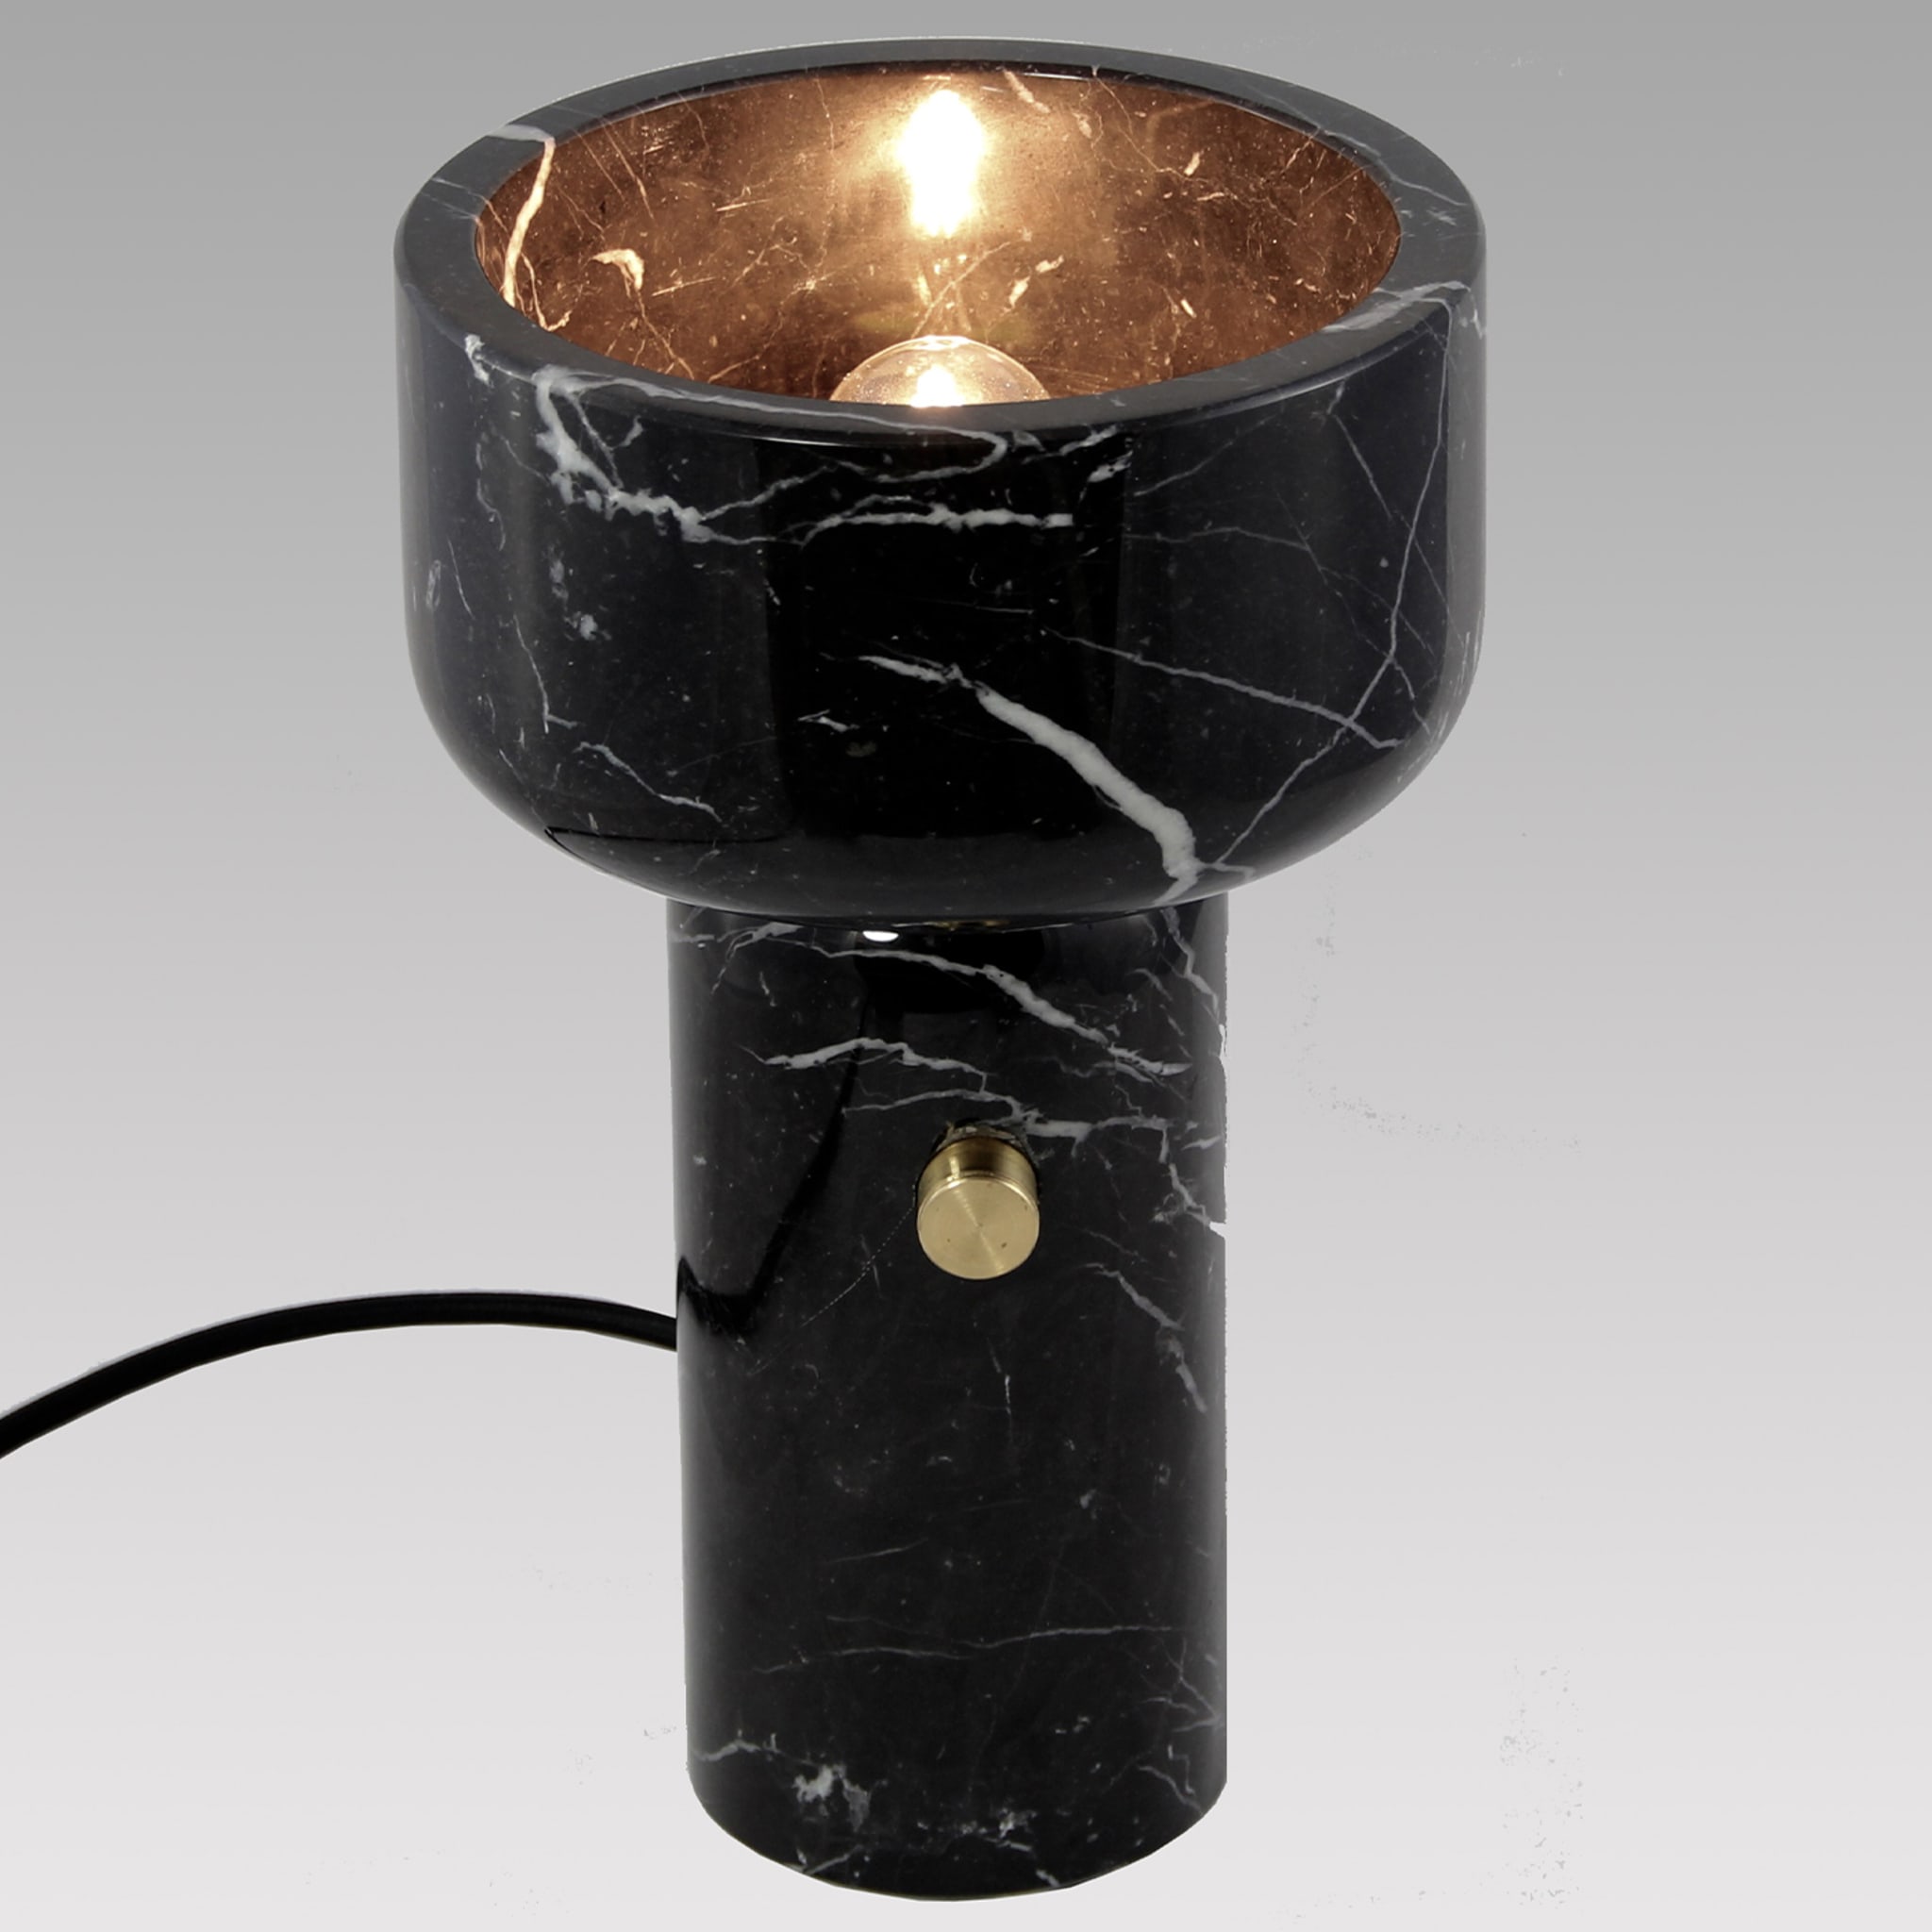 Andromeda Grand Cup Table lamp - Alternative view 1